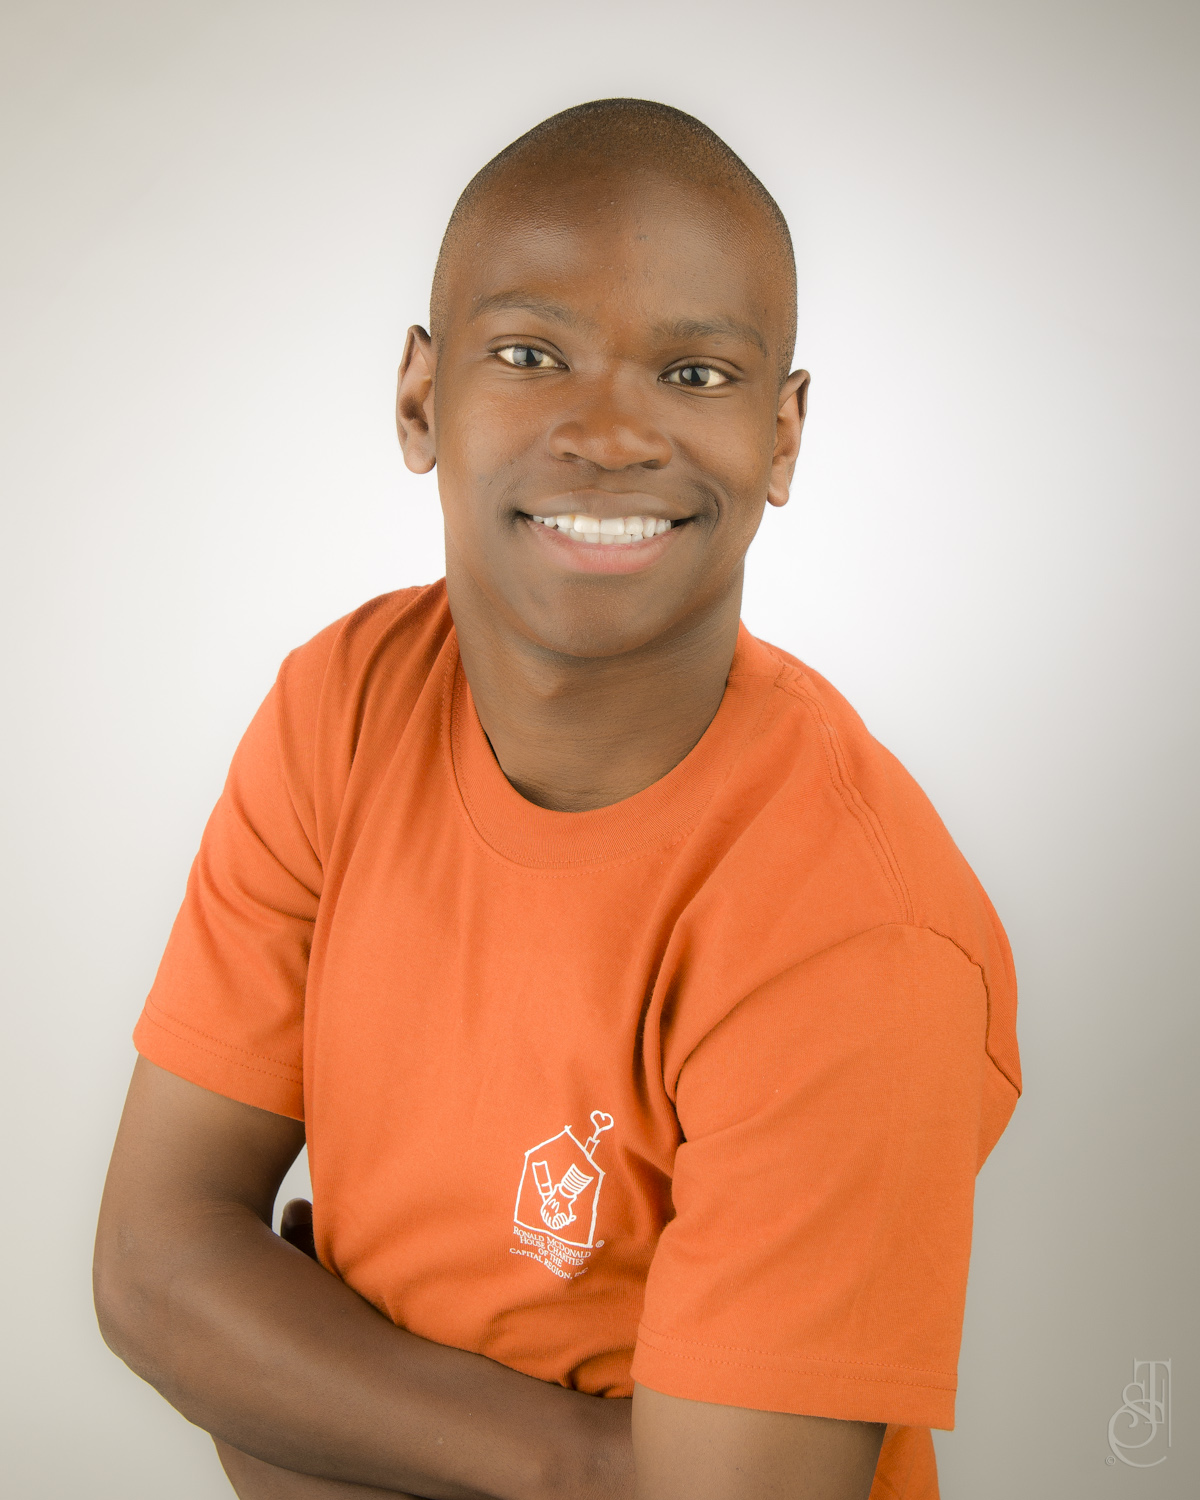 Teenage David poses for the camera in an orange RMHC t-shirt